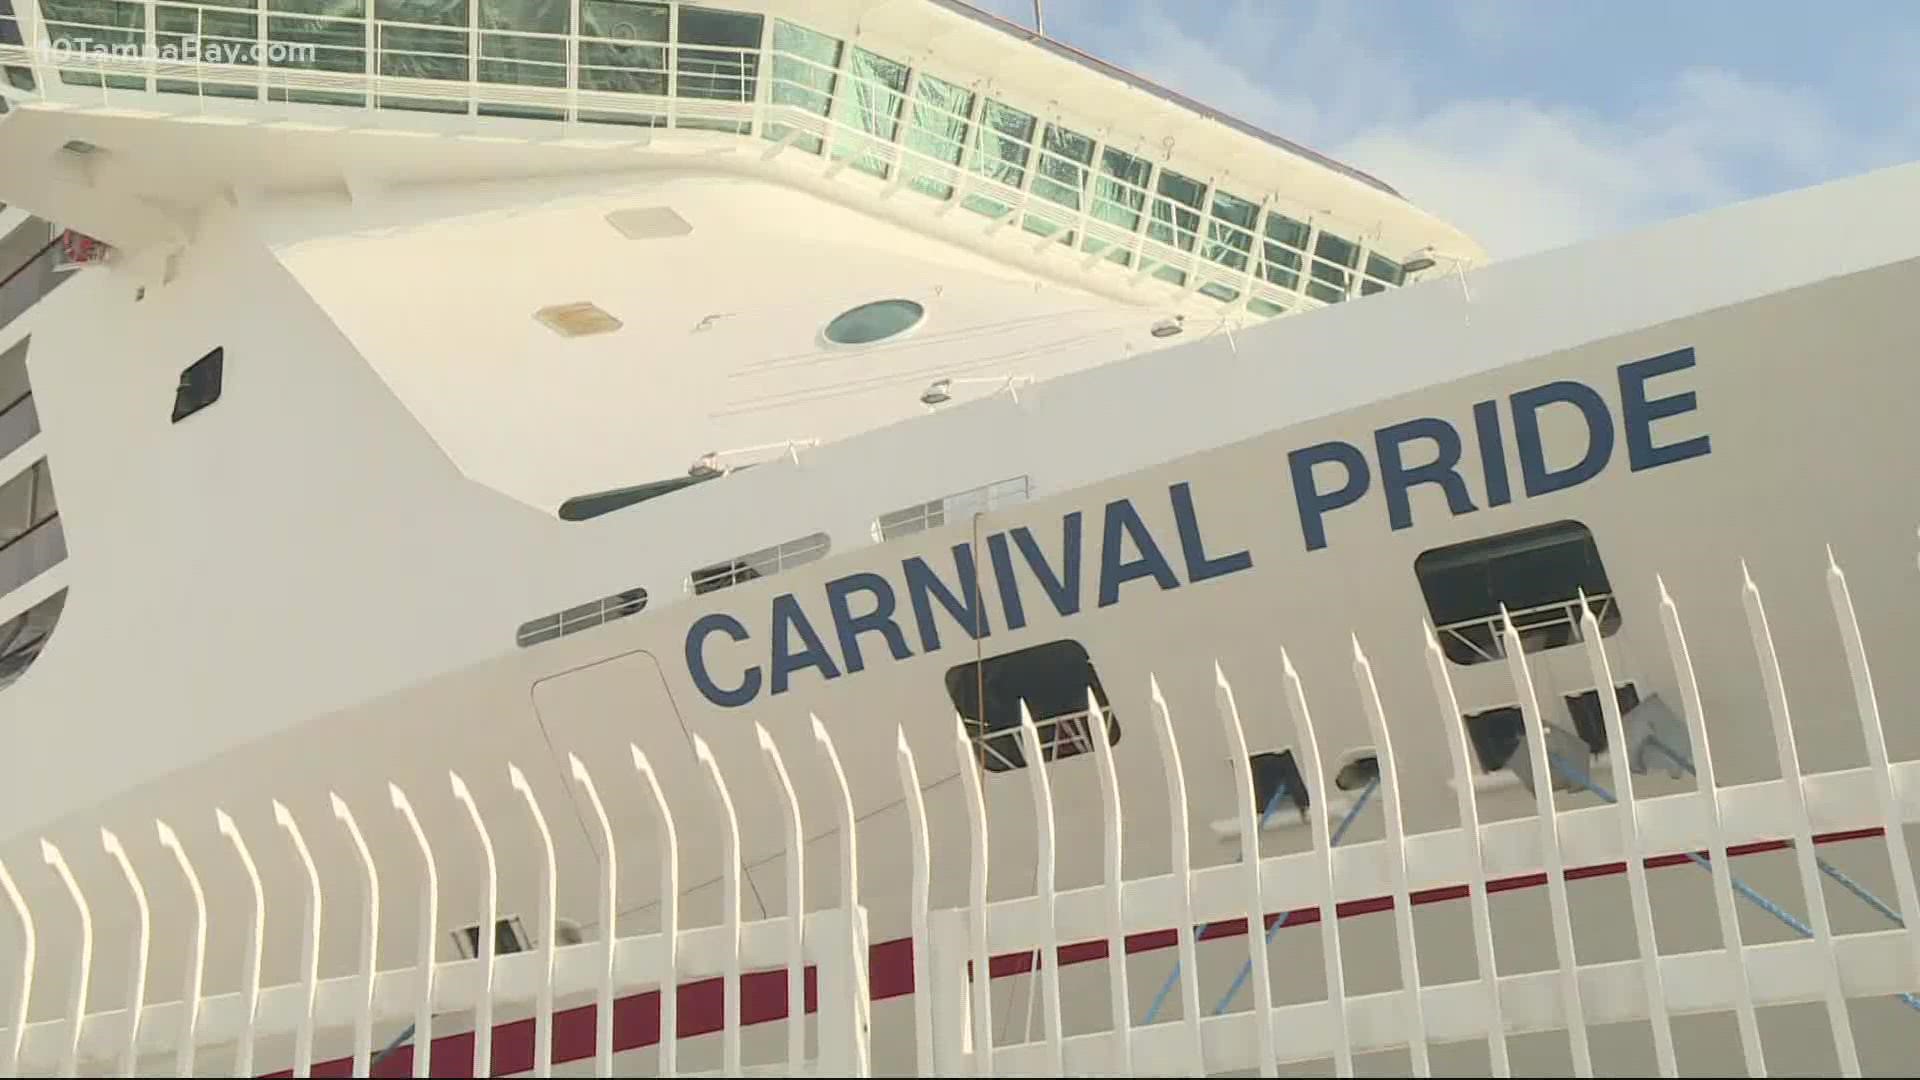 On Thursday, the CDC issued a level 4 travel advisory for cruise ship travel, the highest risk level advisory there is.